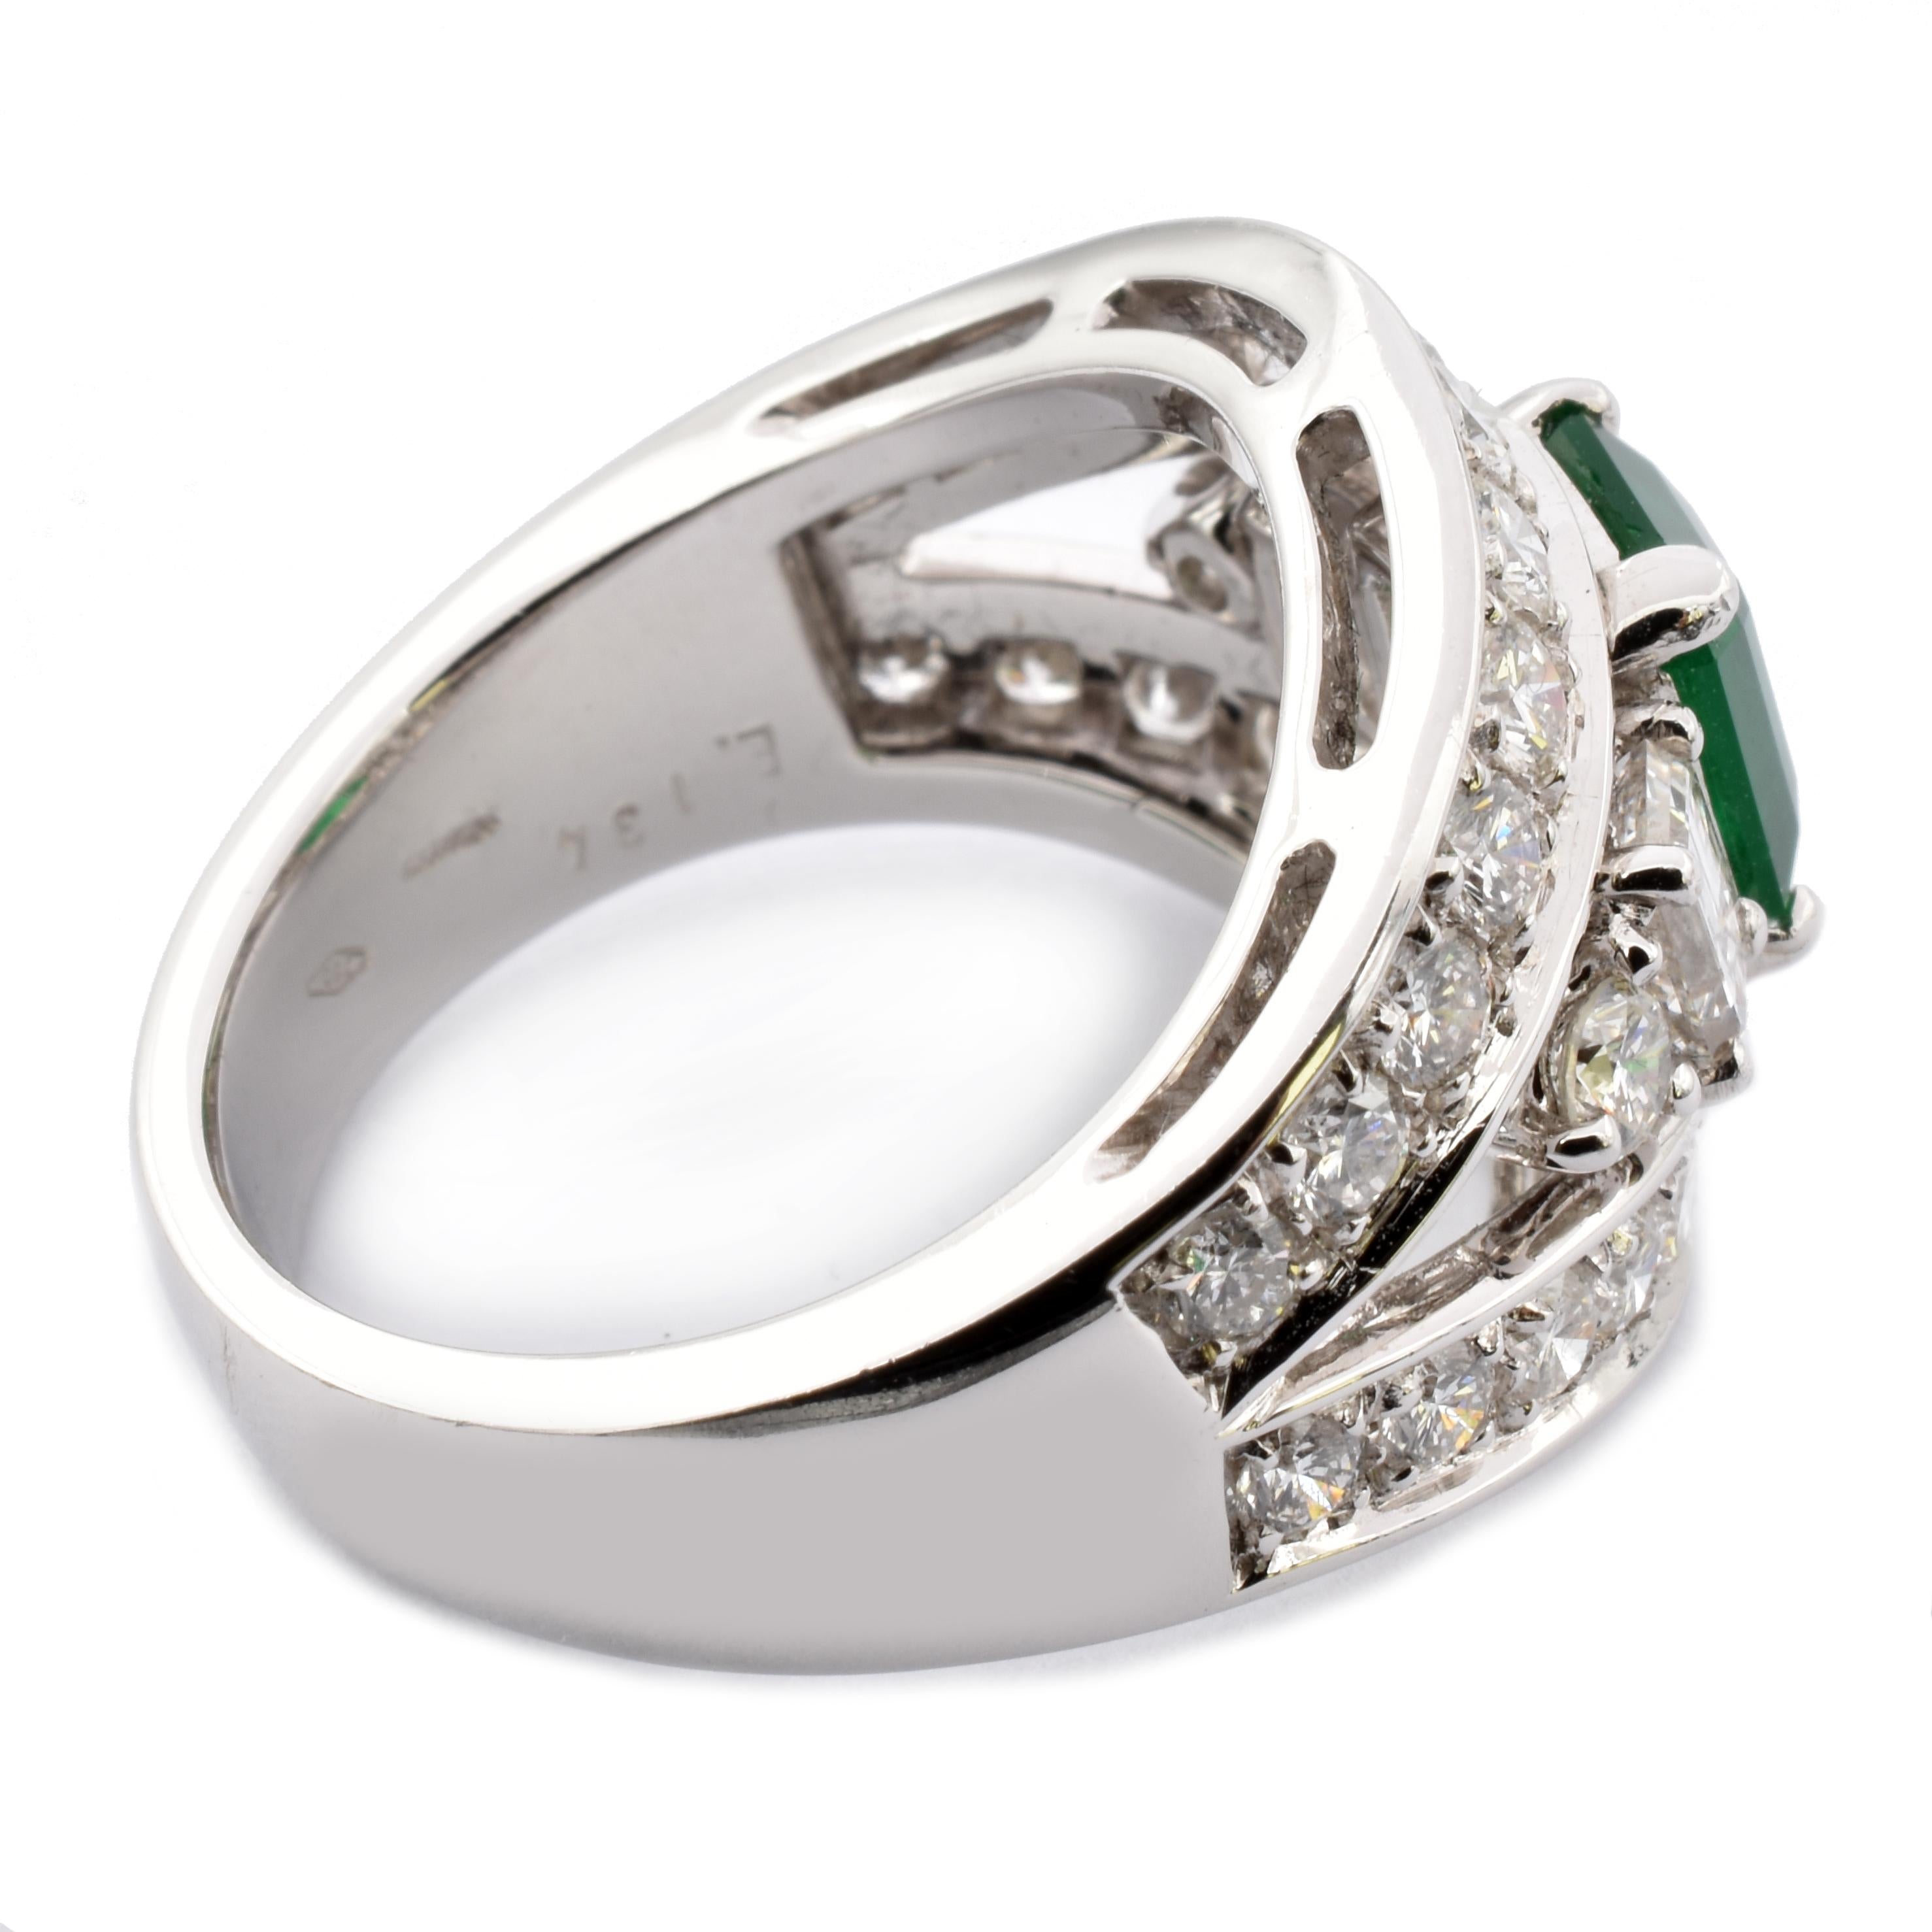 Emerald Cut Brazilian Emerald and Diamonds White Gold Ring Made in Italy For Sale